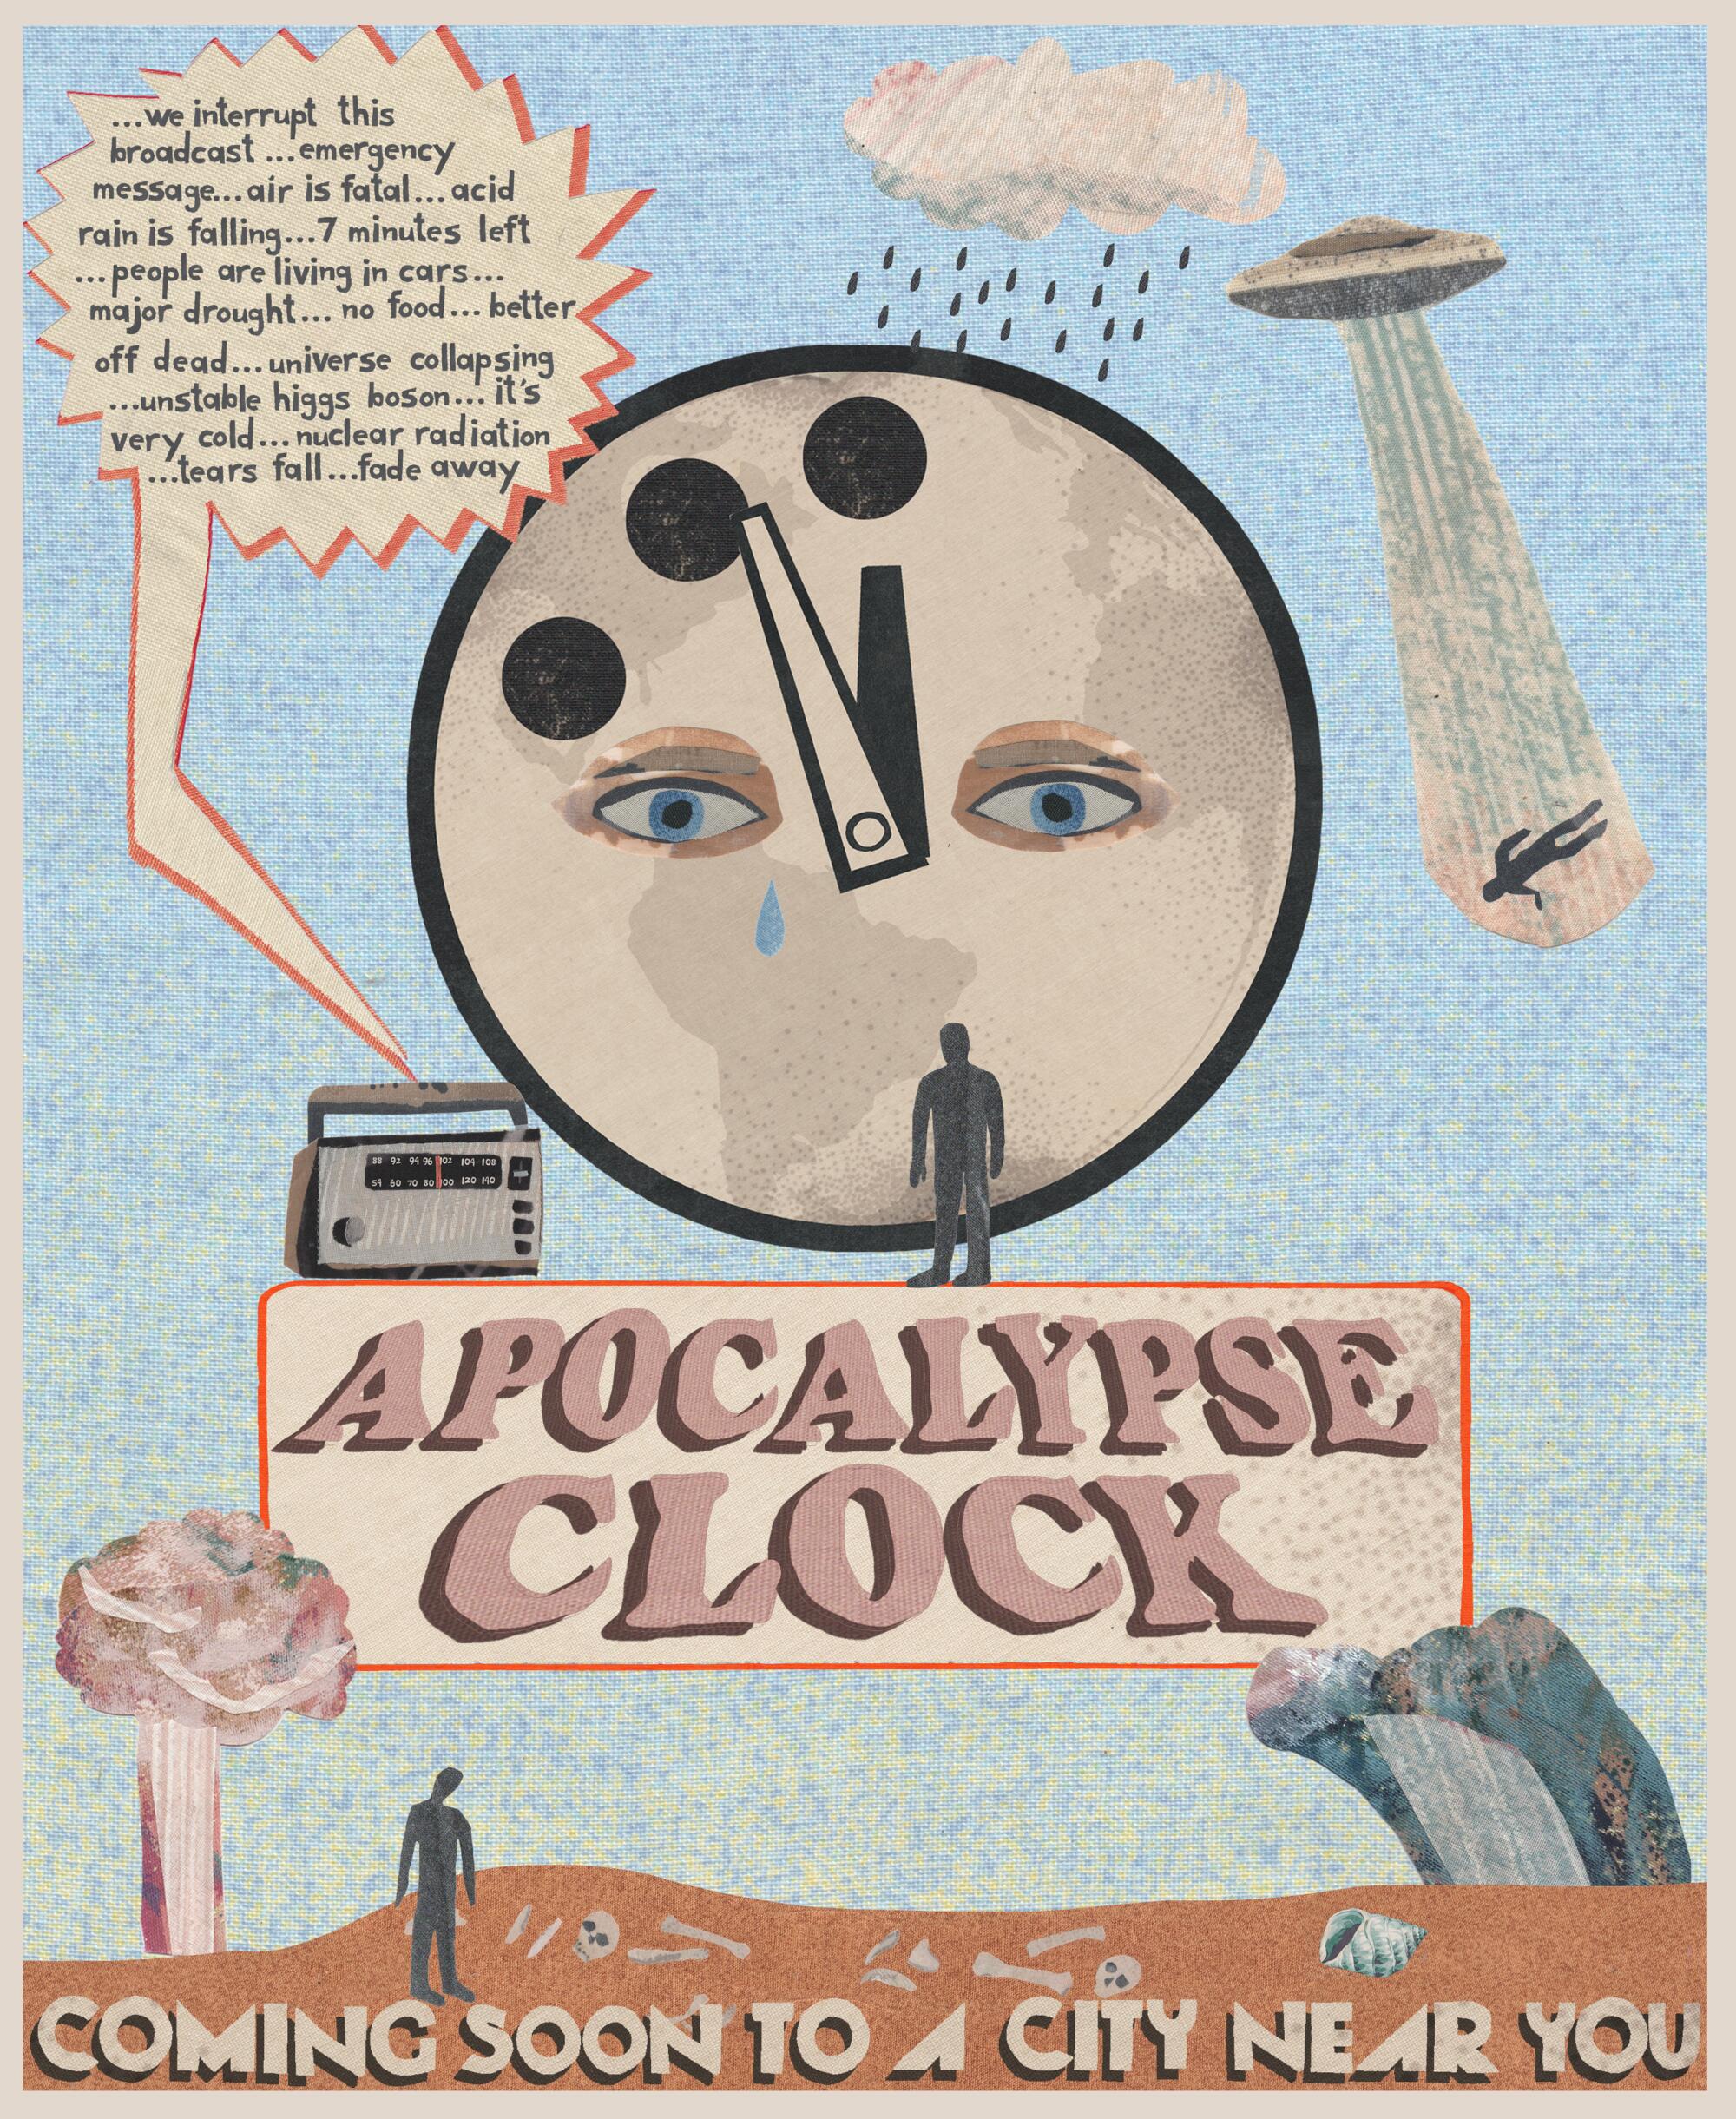 An advertising for "Apocalypse Clock," featuring a large clock and UFO.